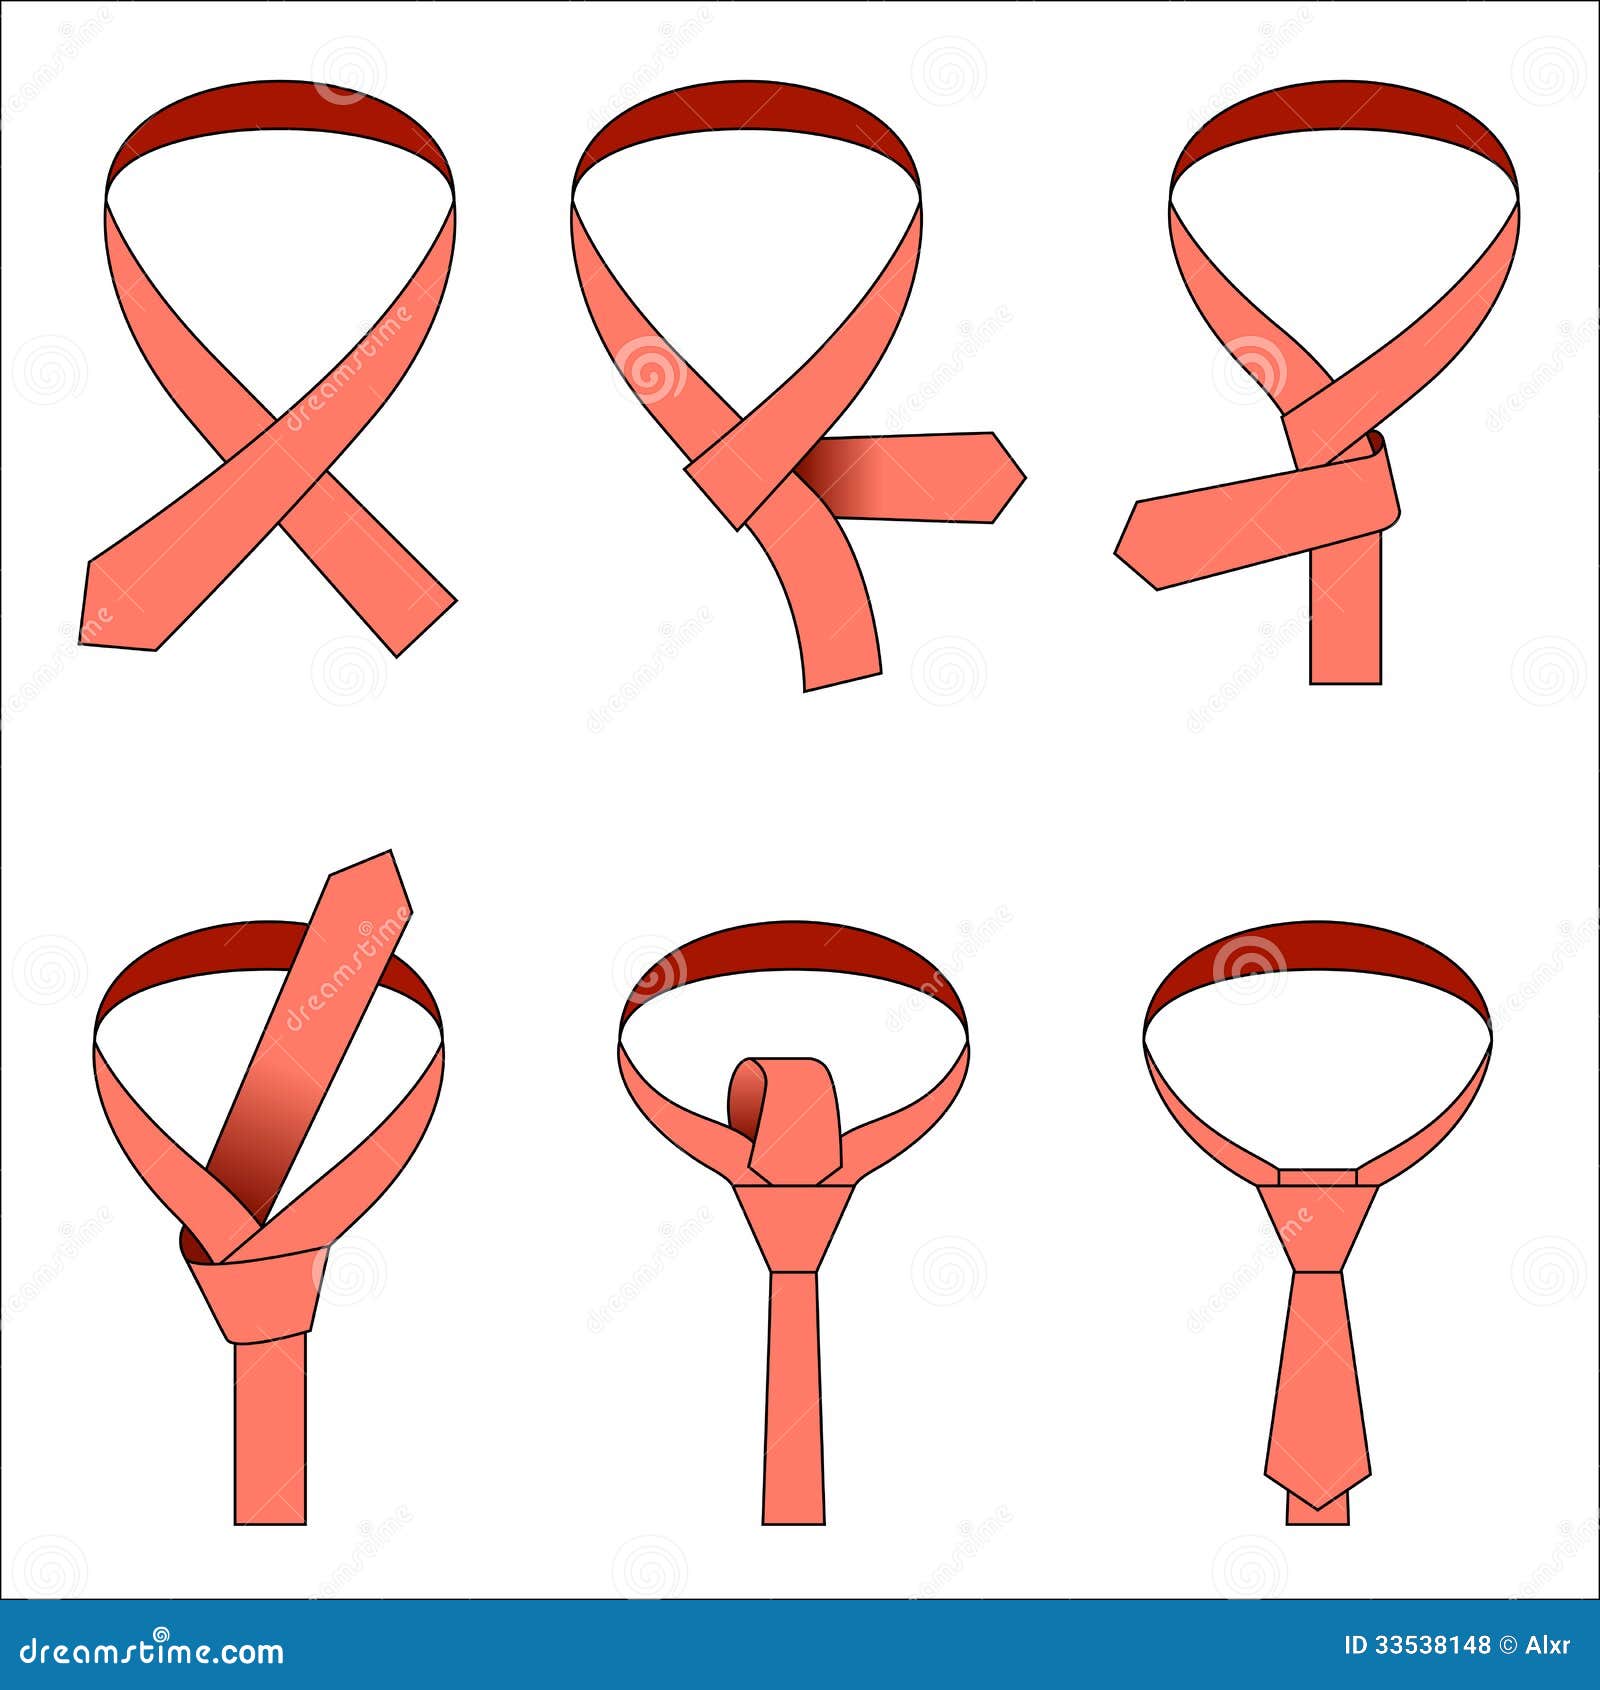 Tie - Simple Knot (Instruction) Stock Vector - Illustration of